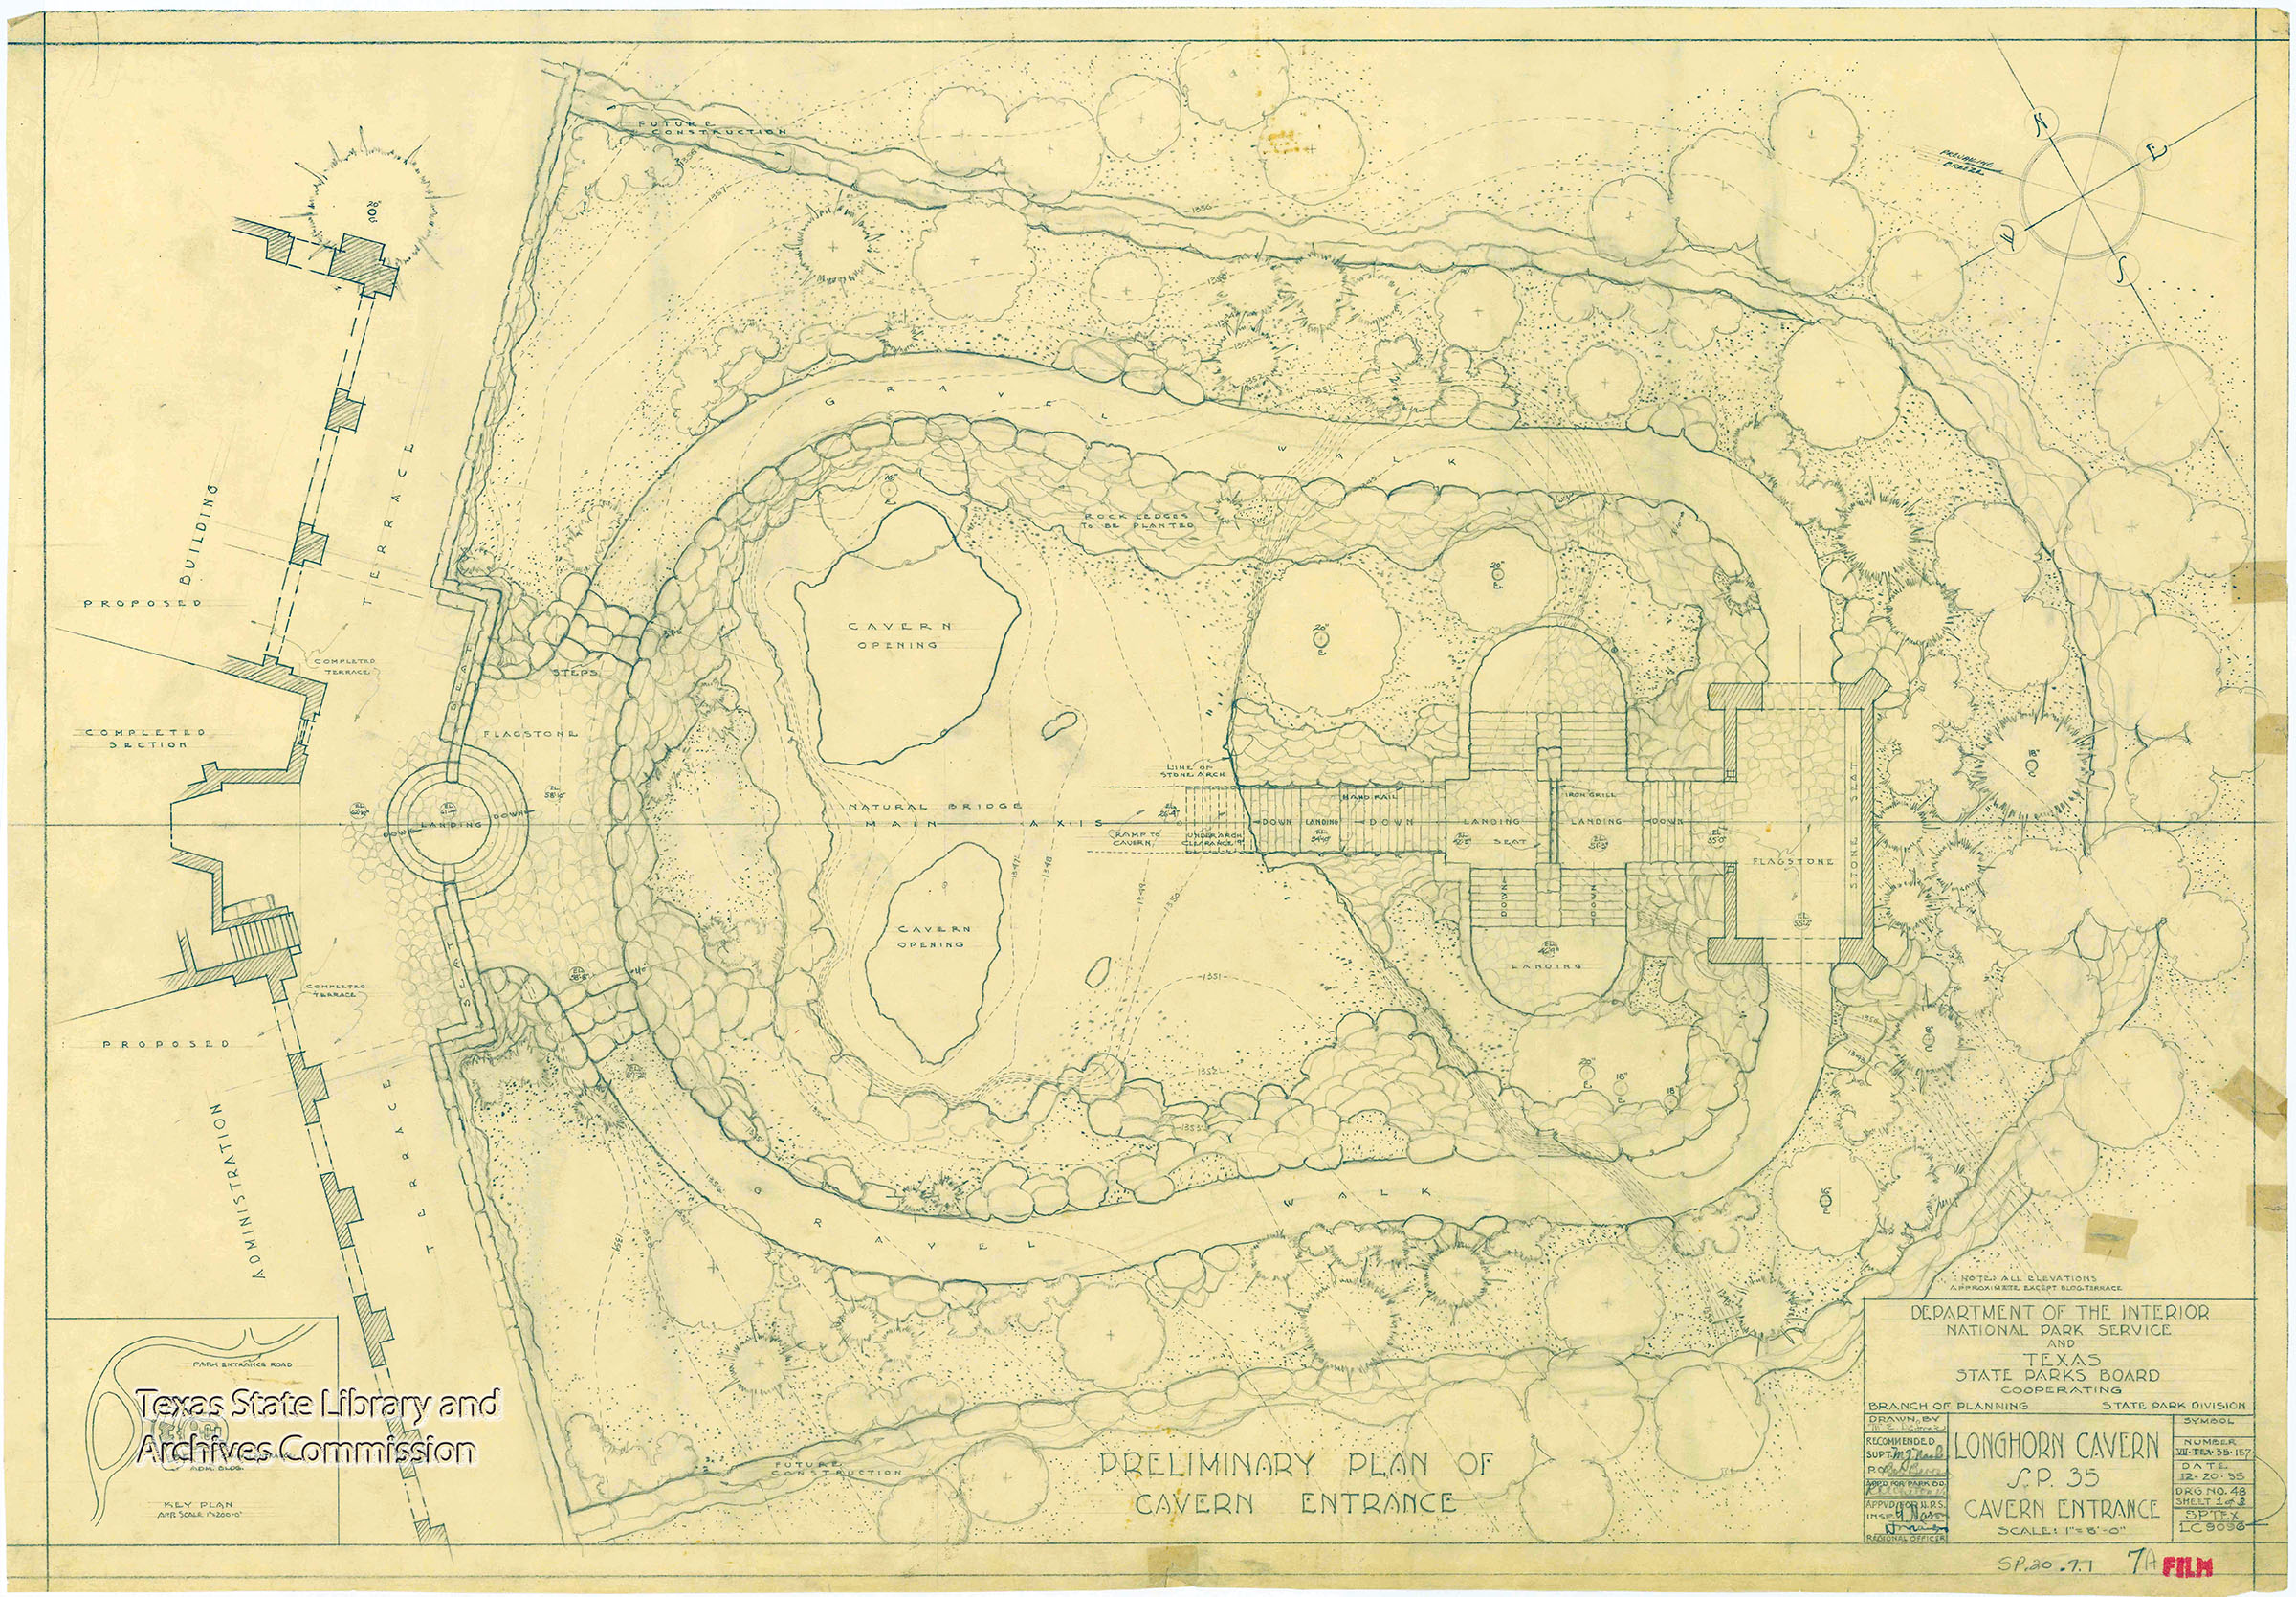 A yellowed blueprint showing an overhead view of a park